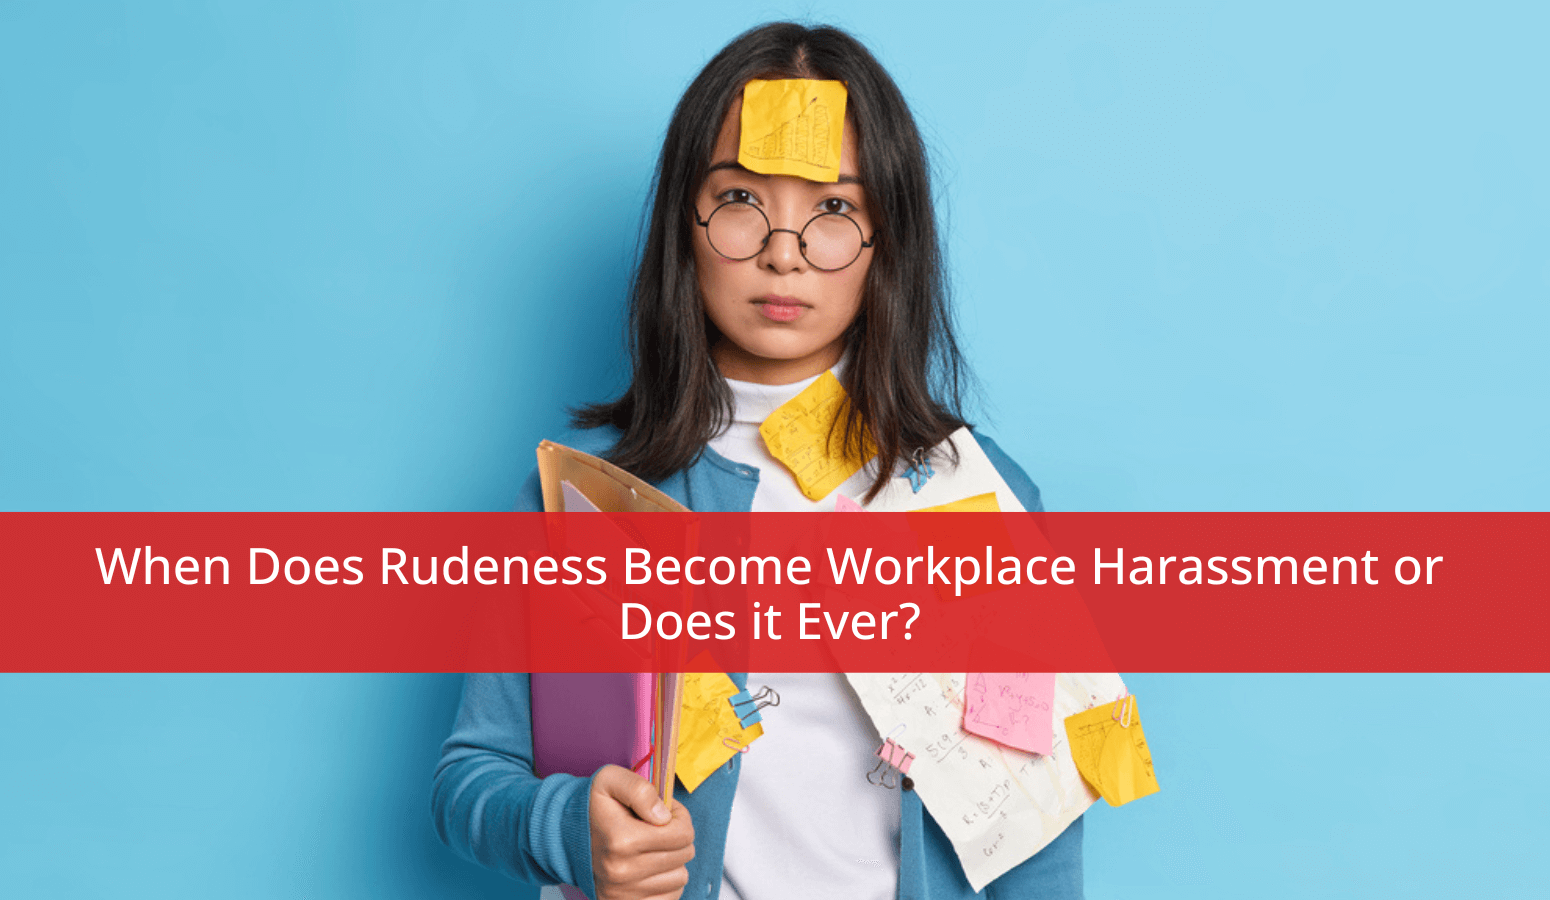 Featured image for “When Does Rudeness Become Workplace Harassment?”